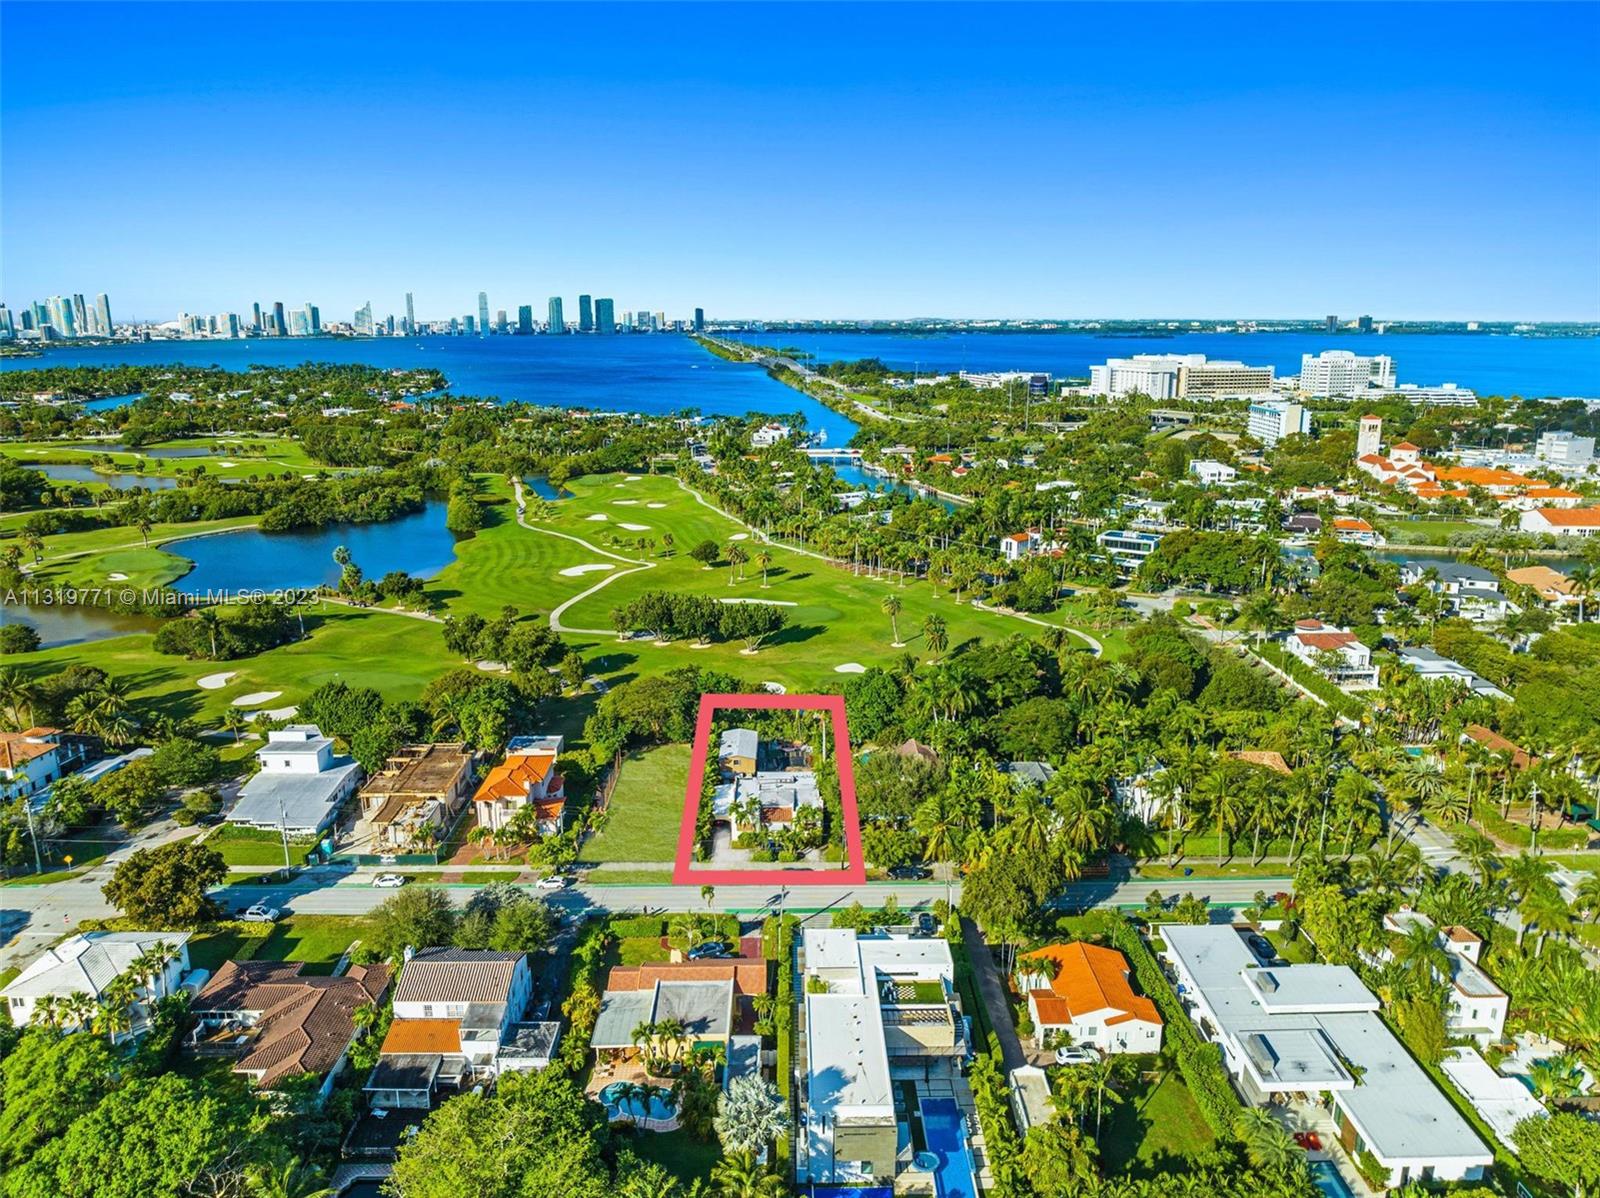 FANTASTIC OPPORTUNITY TO DEVELOP YOUR MODERN TROPICAL VILLA ON THE MIAMI BEACH GOLF COURSE! Build Your Dream Home on large 9,750 SF LOT in South Beach. Enjoy Gorgeous Sunsets & Miami City Downtown Skyline Views from this Prestigious Miami Beach Golf Course location. One of the Most Sought-after Neighborhoods with walkability to Sunset Harbour & Lincoln Road Shopping, Fine Dining & Entertainment. Just minutes to the Beach, Golf Course, Tennis Courts, Botanical Gardens, Schools & Places of Worship. EASY TO SHOW.